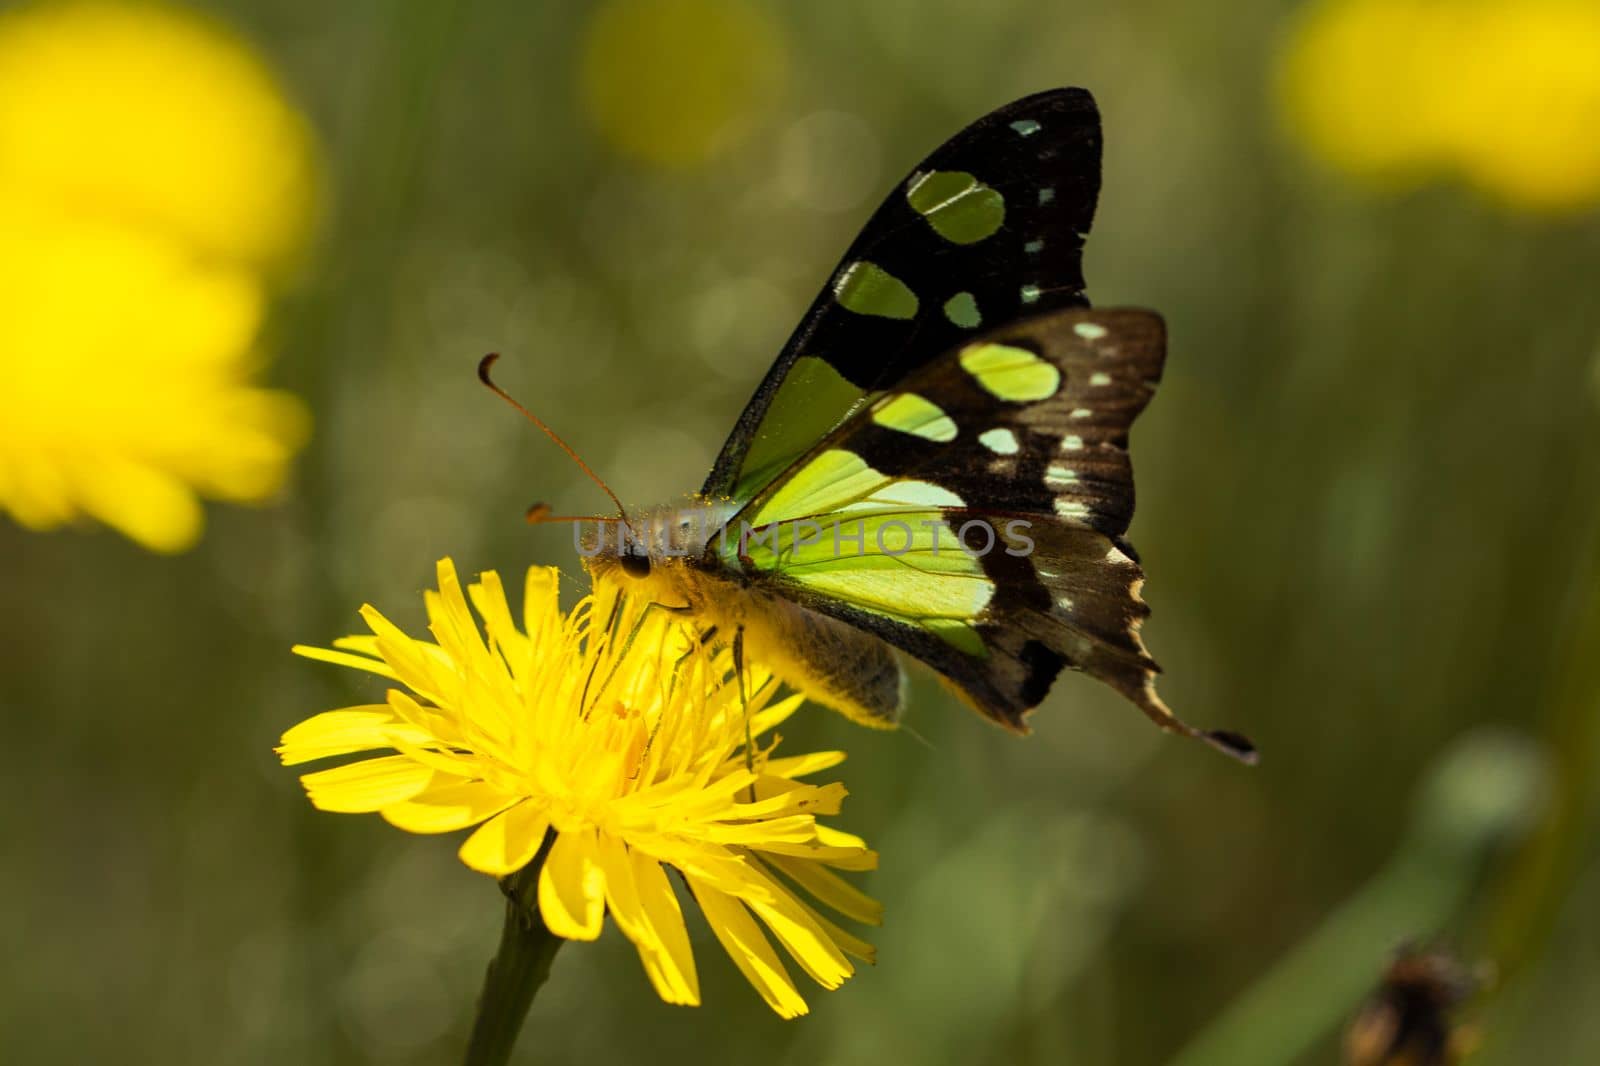 A stunning macro shot of a vibrant, green Macleay's swallowtail butterfly perched on a yellow dandelion flower. Perfect for use in advertising, editorial content, or as wall art for nature lovers.